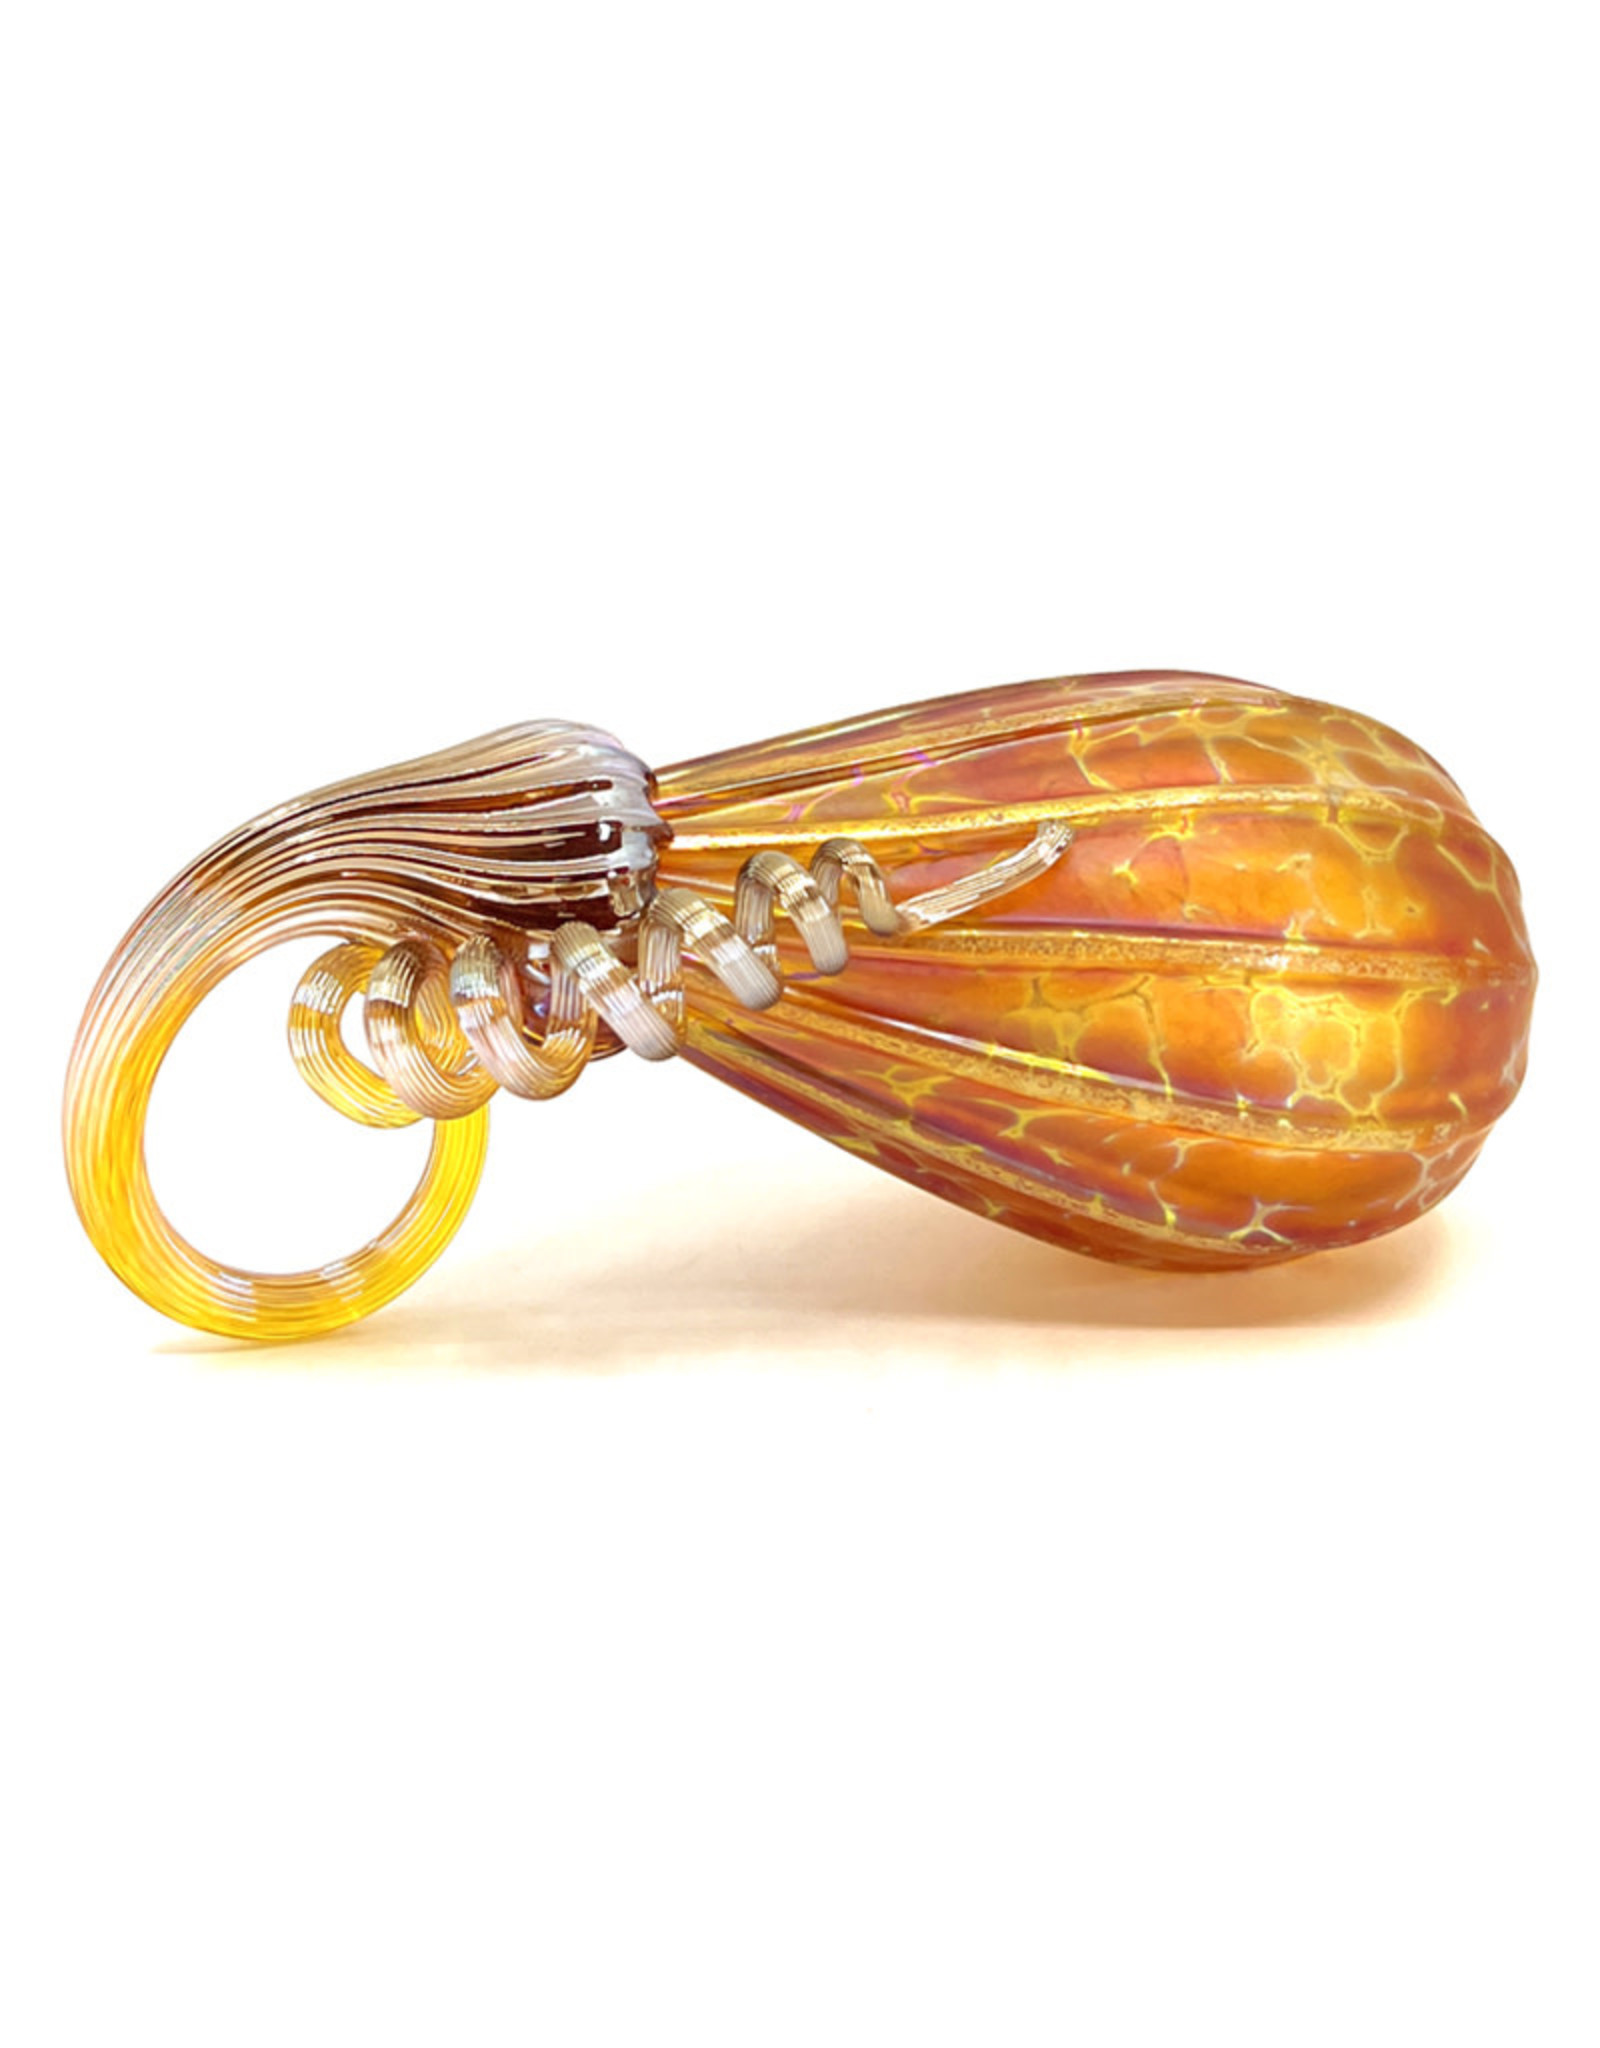 THE FURNACE GLASSWORKS GOLD RUBY PETITE GOURD